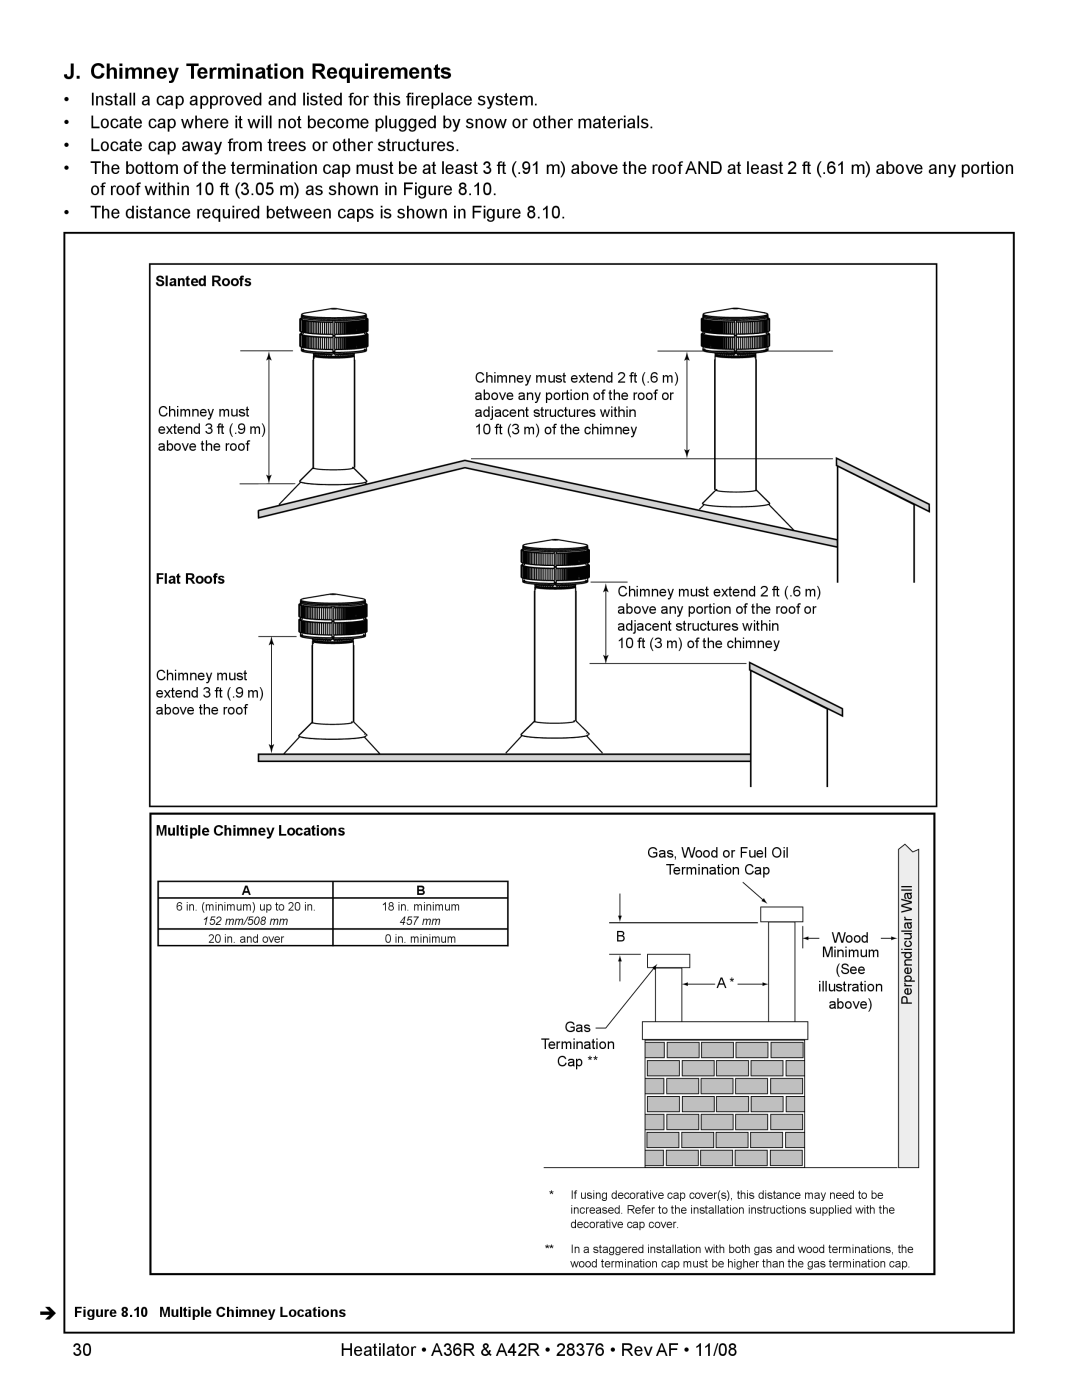 Hearth and Home Technologies A36RH, A42RH owner manual Chimney Termination Requirements, Flat Roofs 